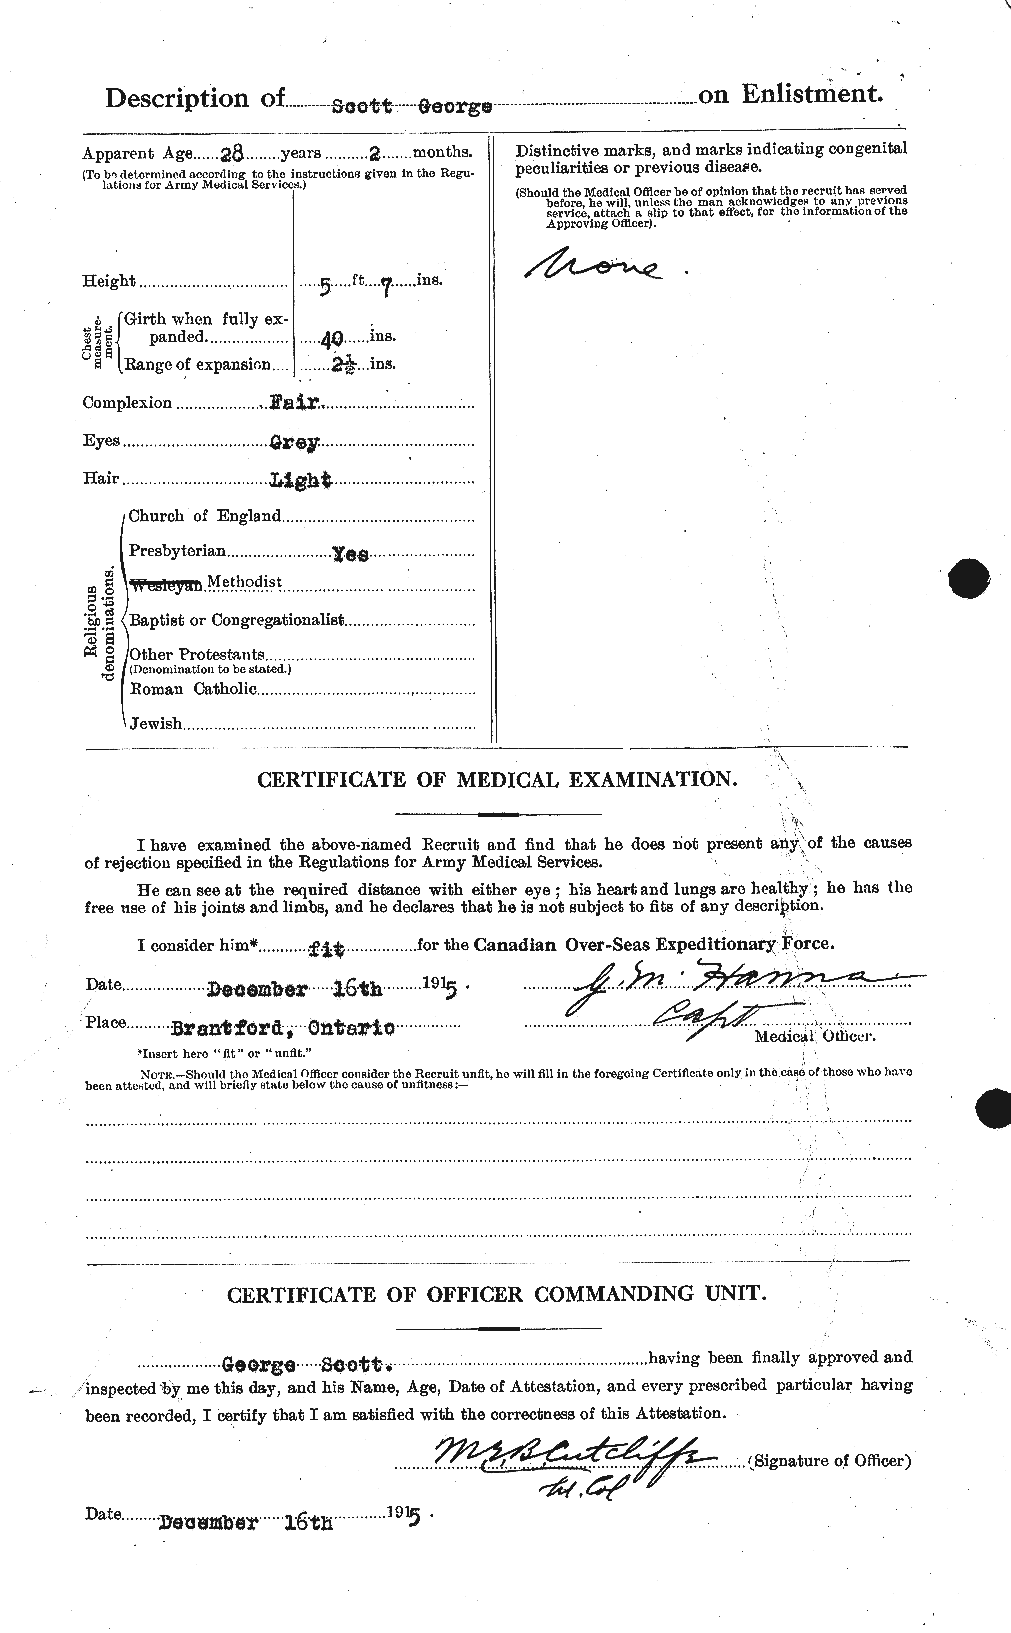 Personnel Records of the First World War - CEF 084352b